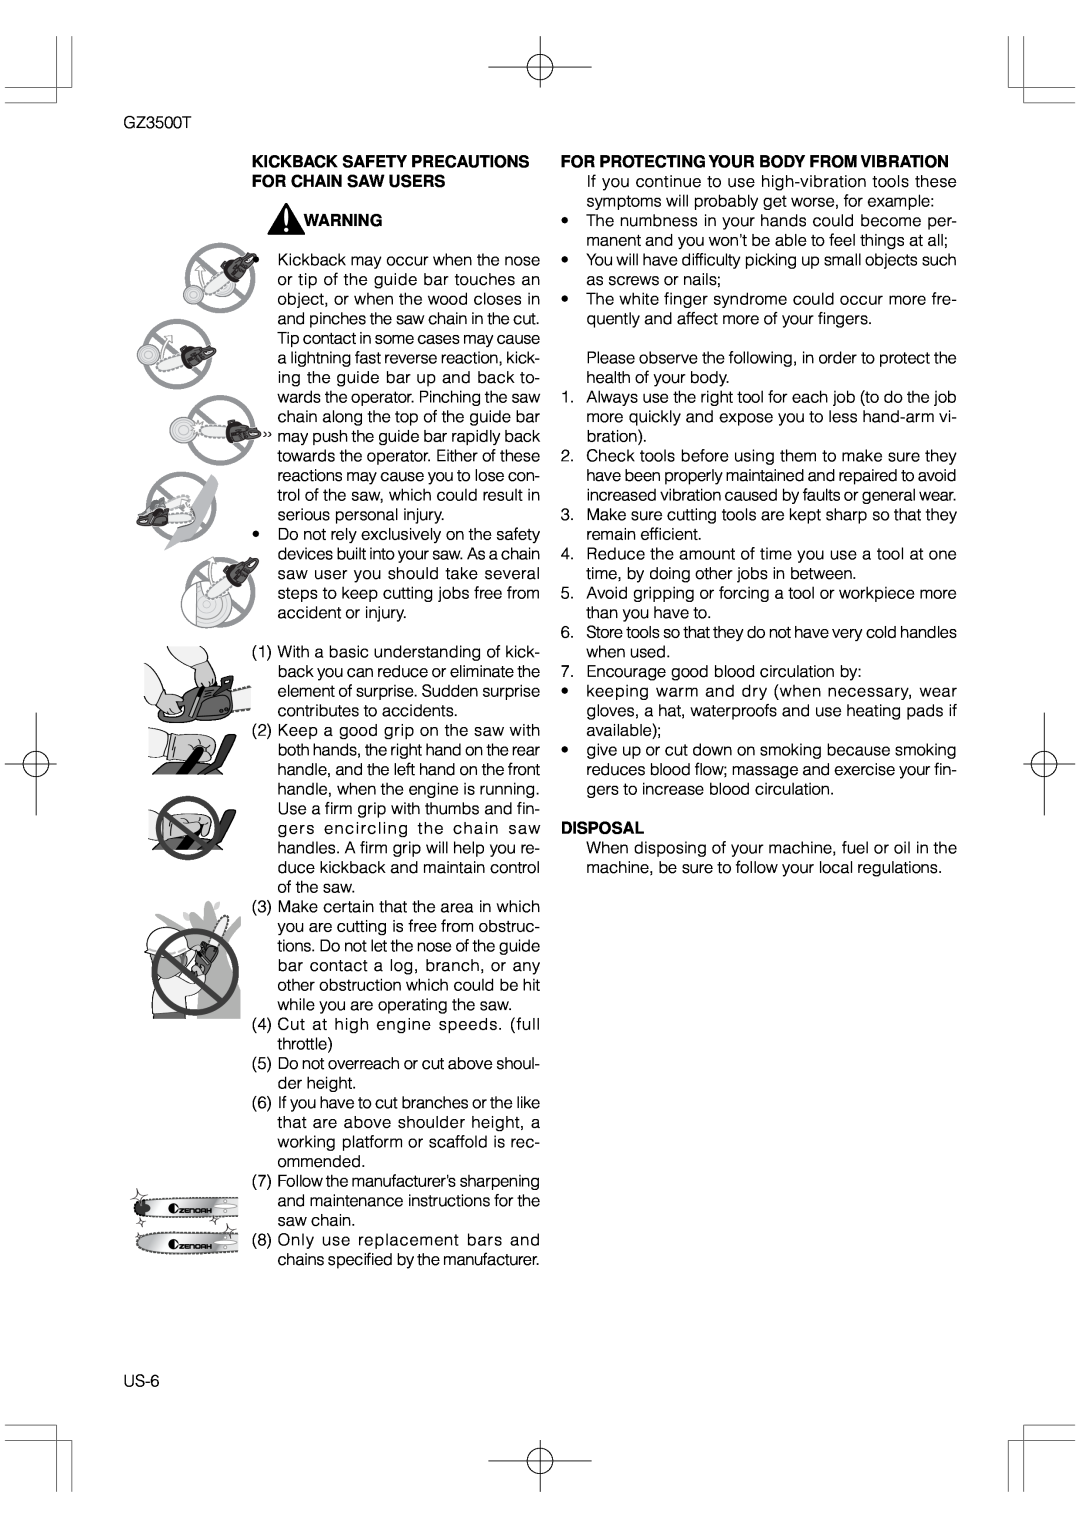 RedMax GZ3500T manual Kickback Safety Precautions For Chain Saw Users, Disposal 